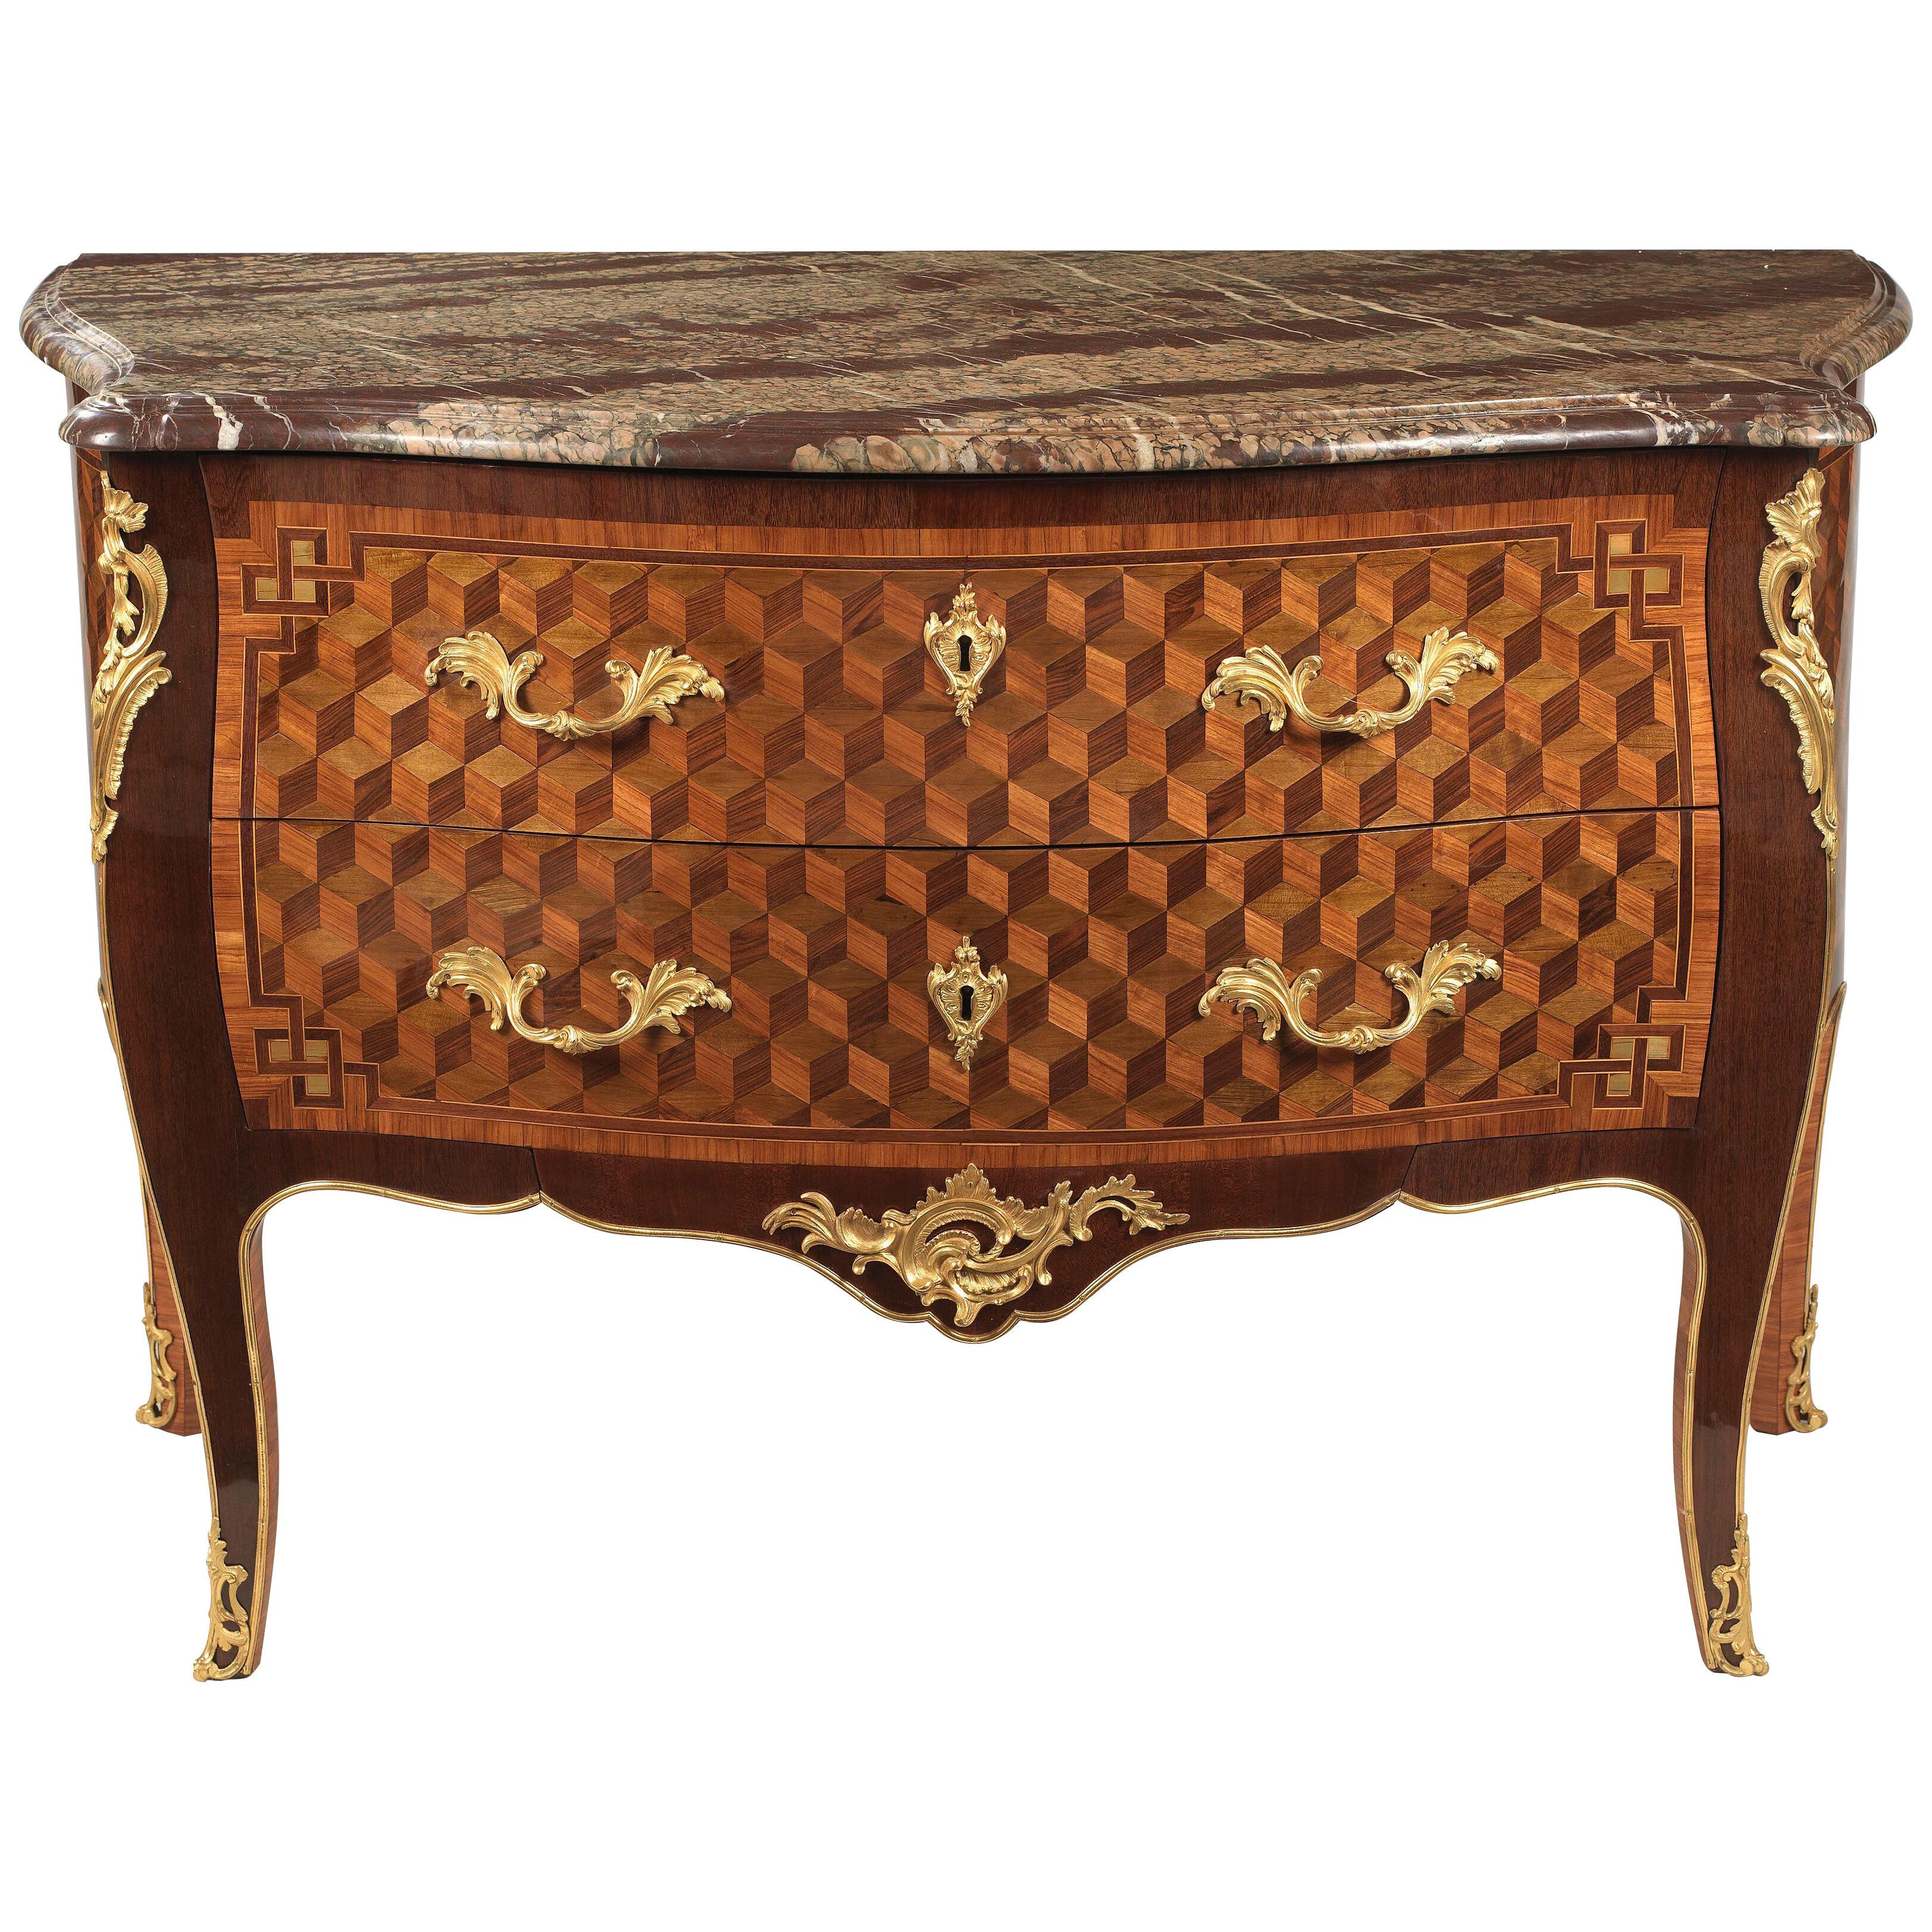 A Fine Pair of Louis XV Marquetry Commodes  By C Wolff 